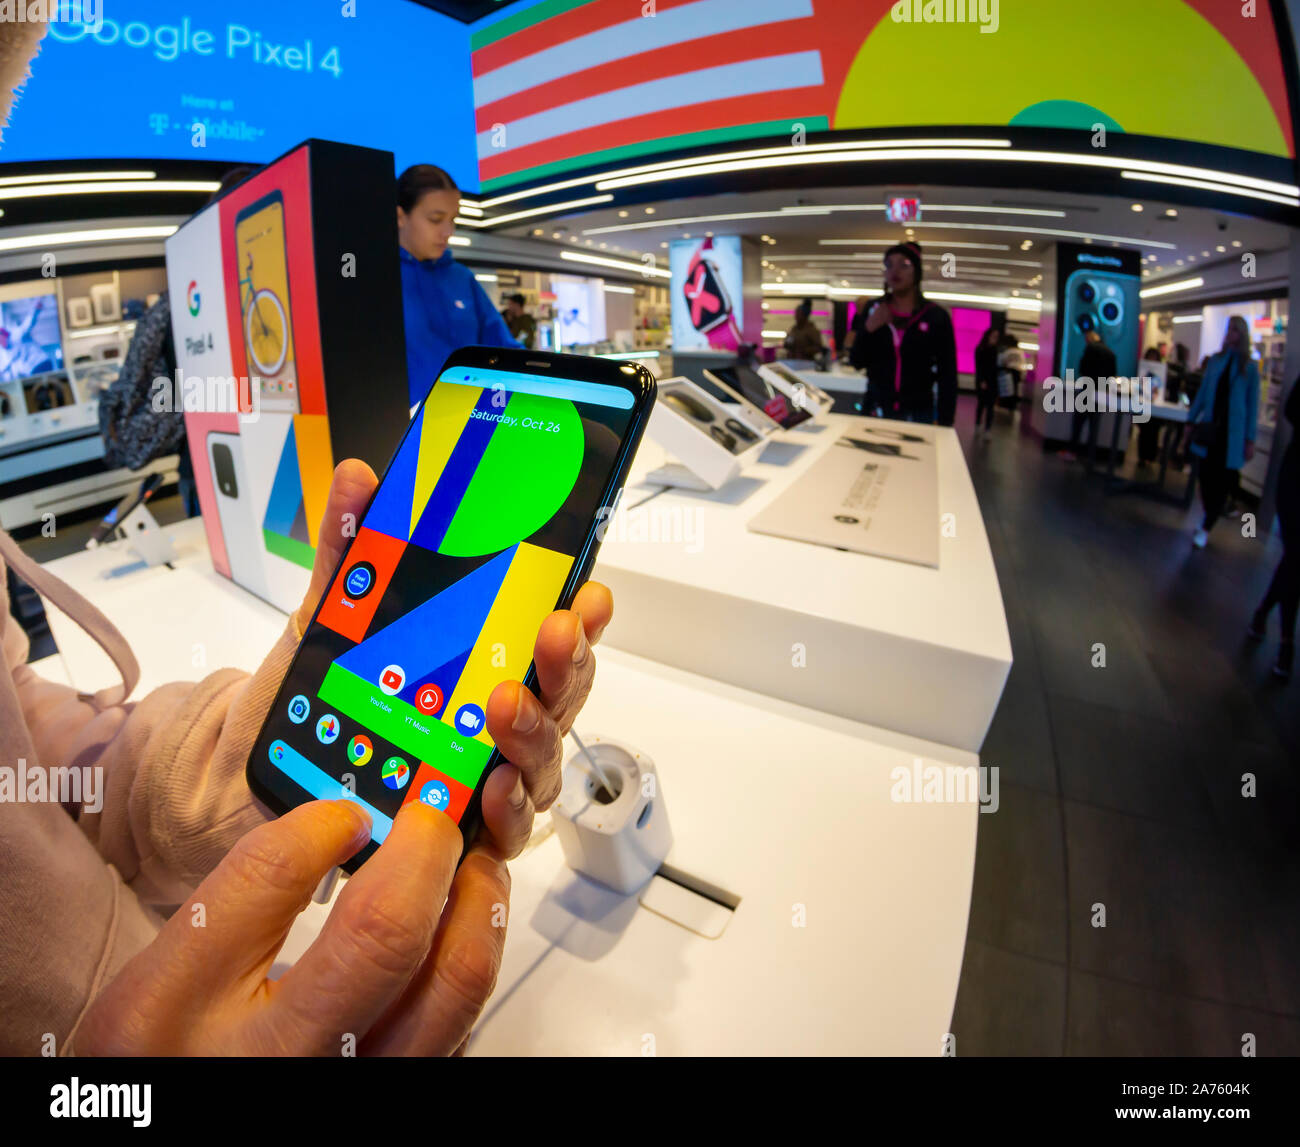 A shopper examines Google’s Pixel 4 smartphone in a T-Mobile store in New York on Saturday, October 26, 2019. (© Richard B. Levine) Stock Photo